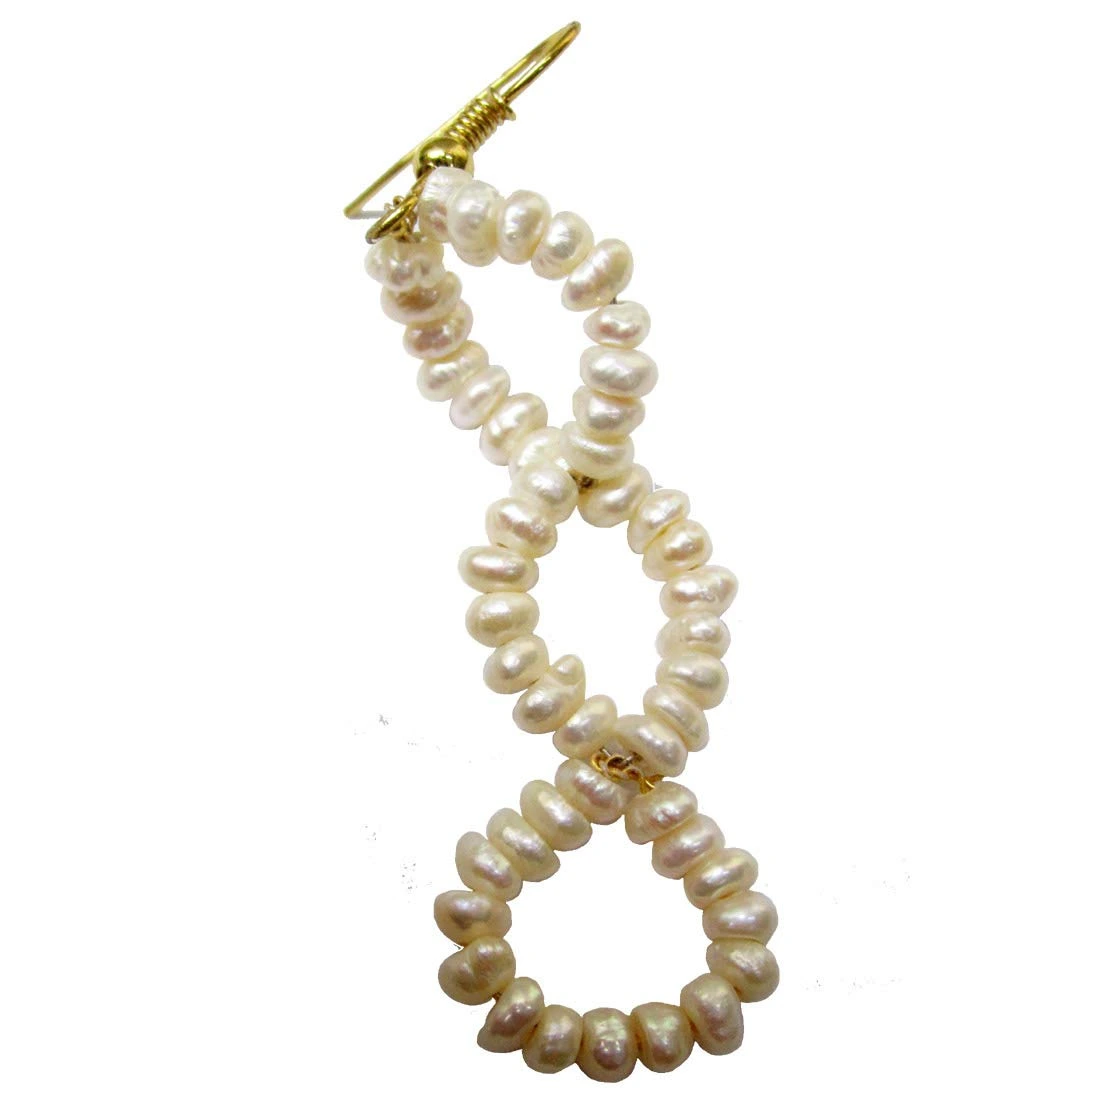 Dangling Real Freshwater Pearl and Gold Plated Wire Style Earrings (SE387)